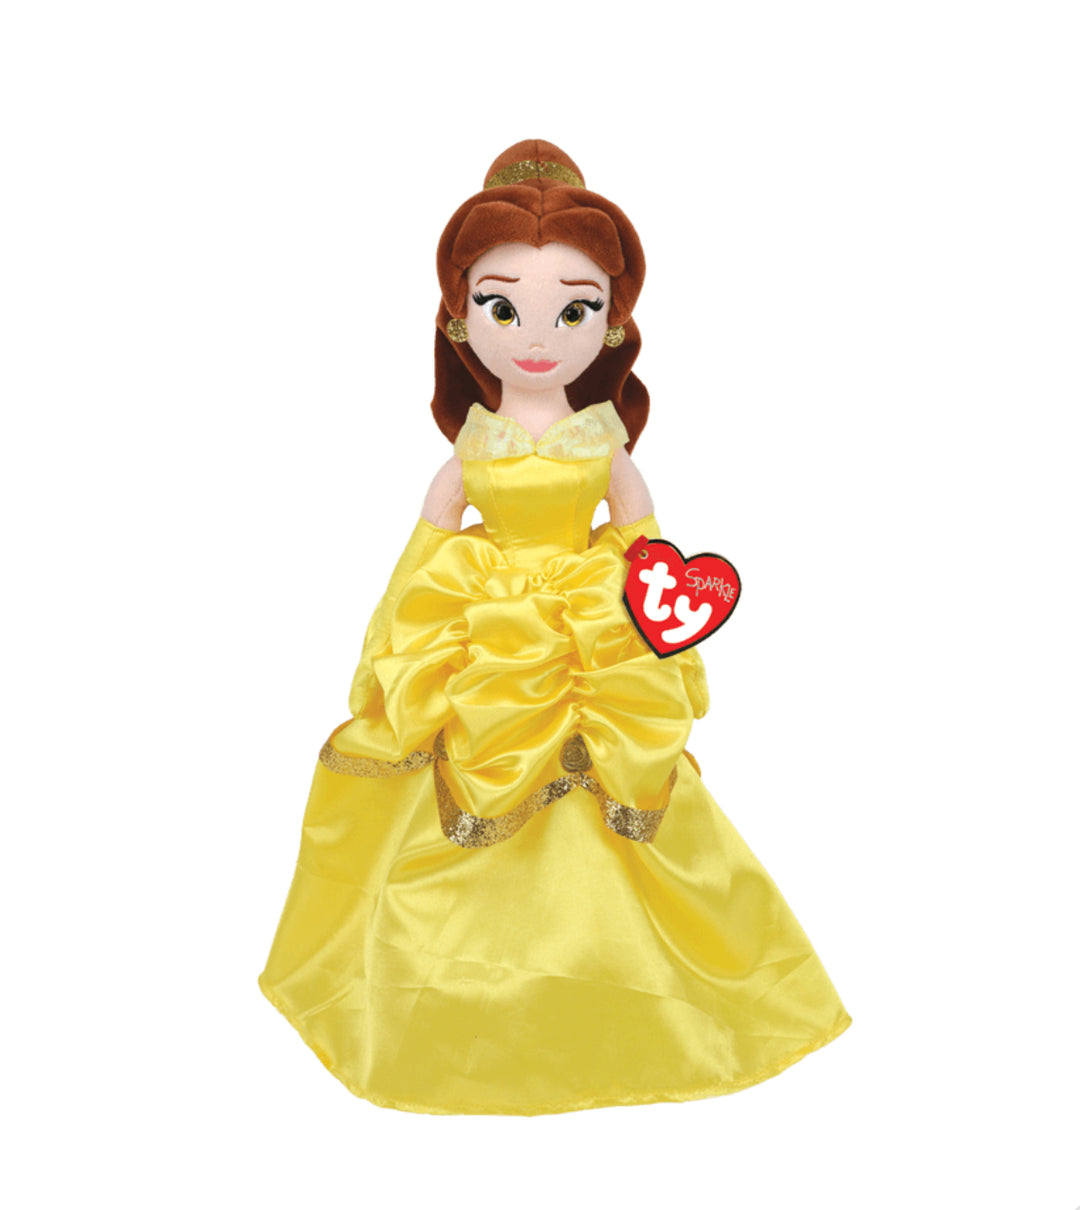 TY Disney Princess Stuffed Animal, Belle-240 Kids-Inspired by Justeen-Women's Clothing Boutique in Chicago, Illinois